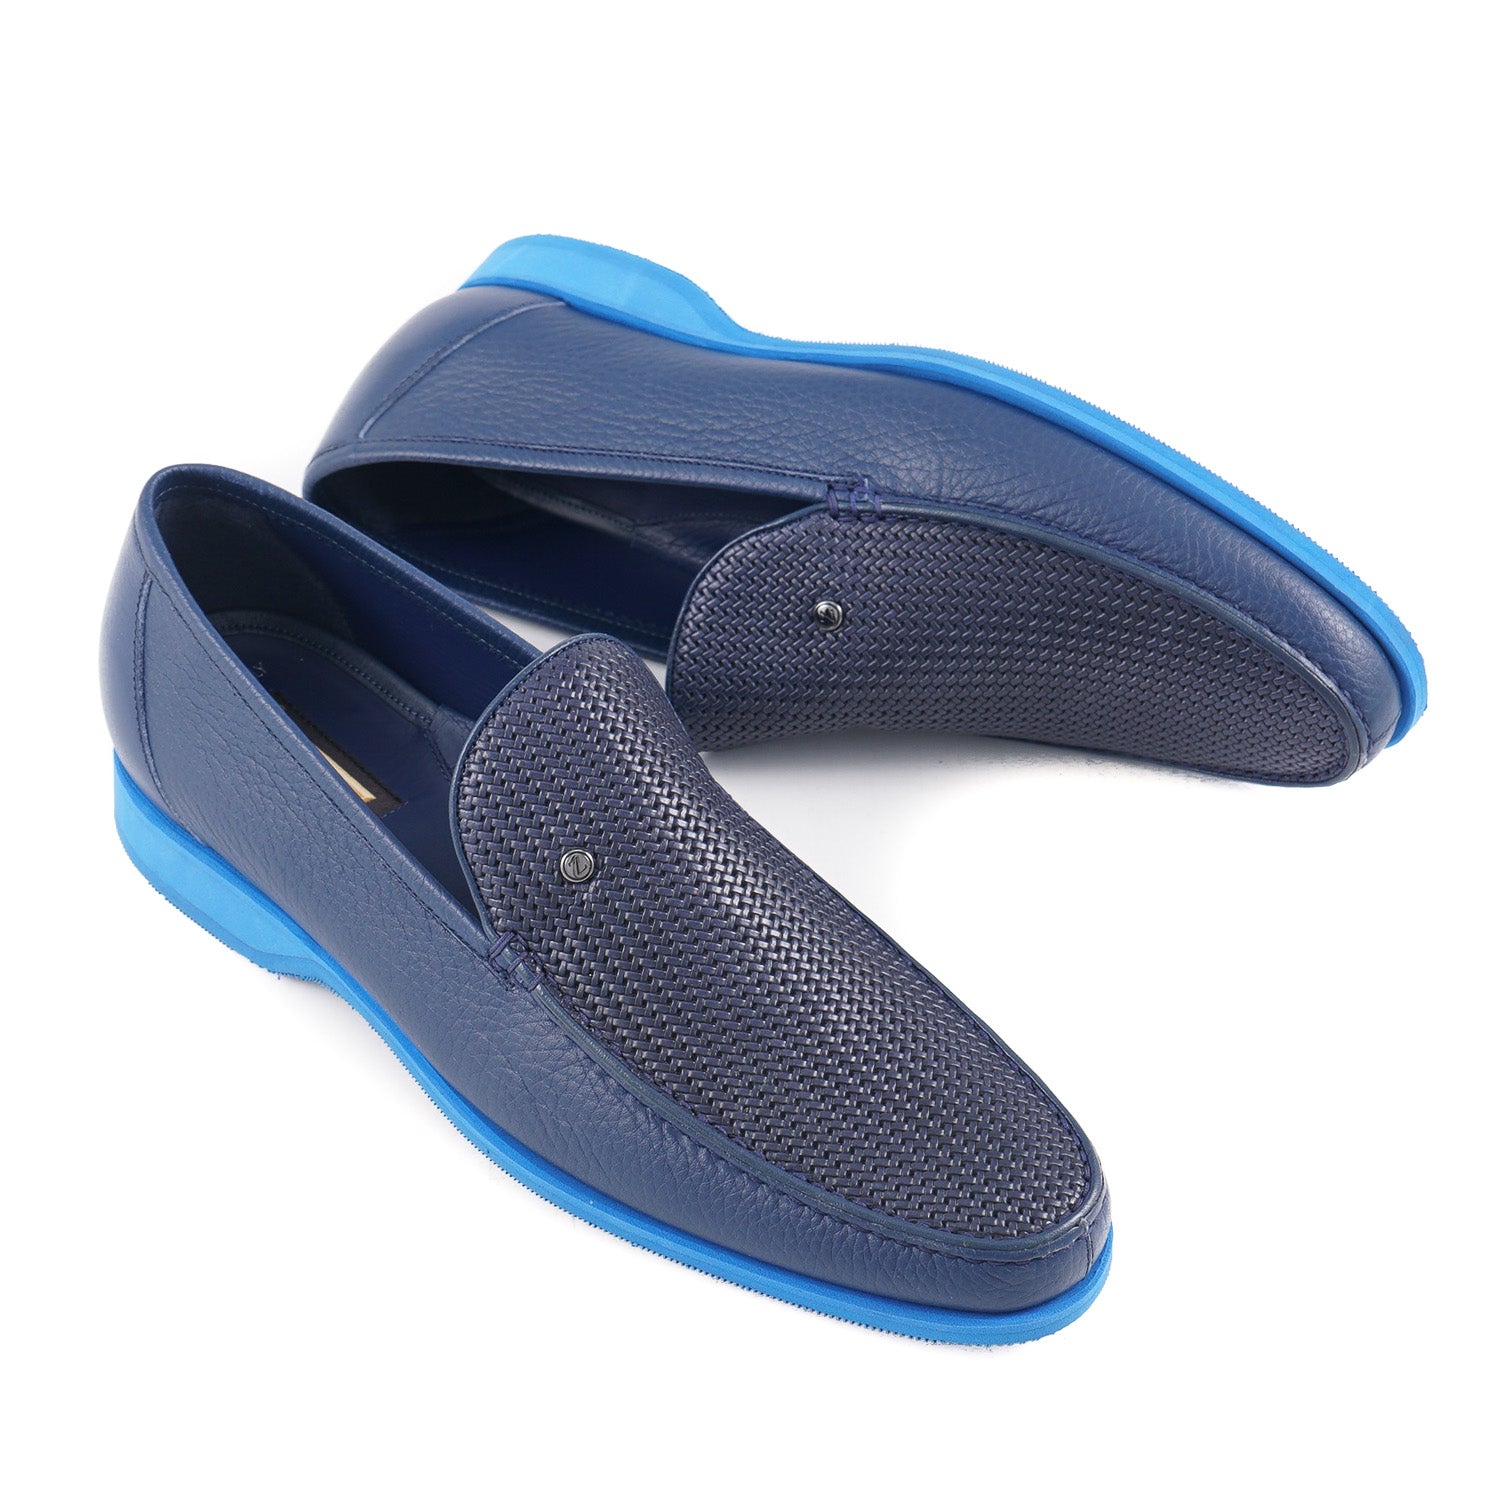 Zilli Soft Leather Loafer with Woven Detail - Top Shelf Apparel